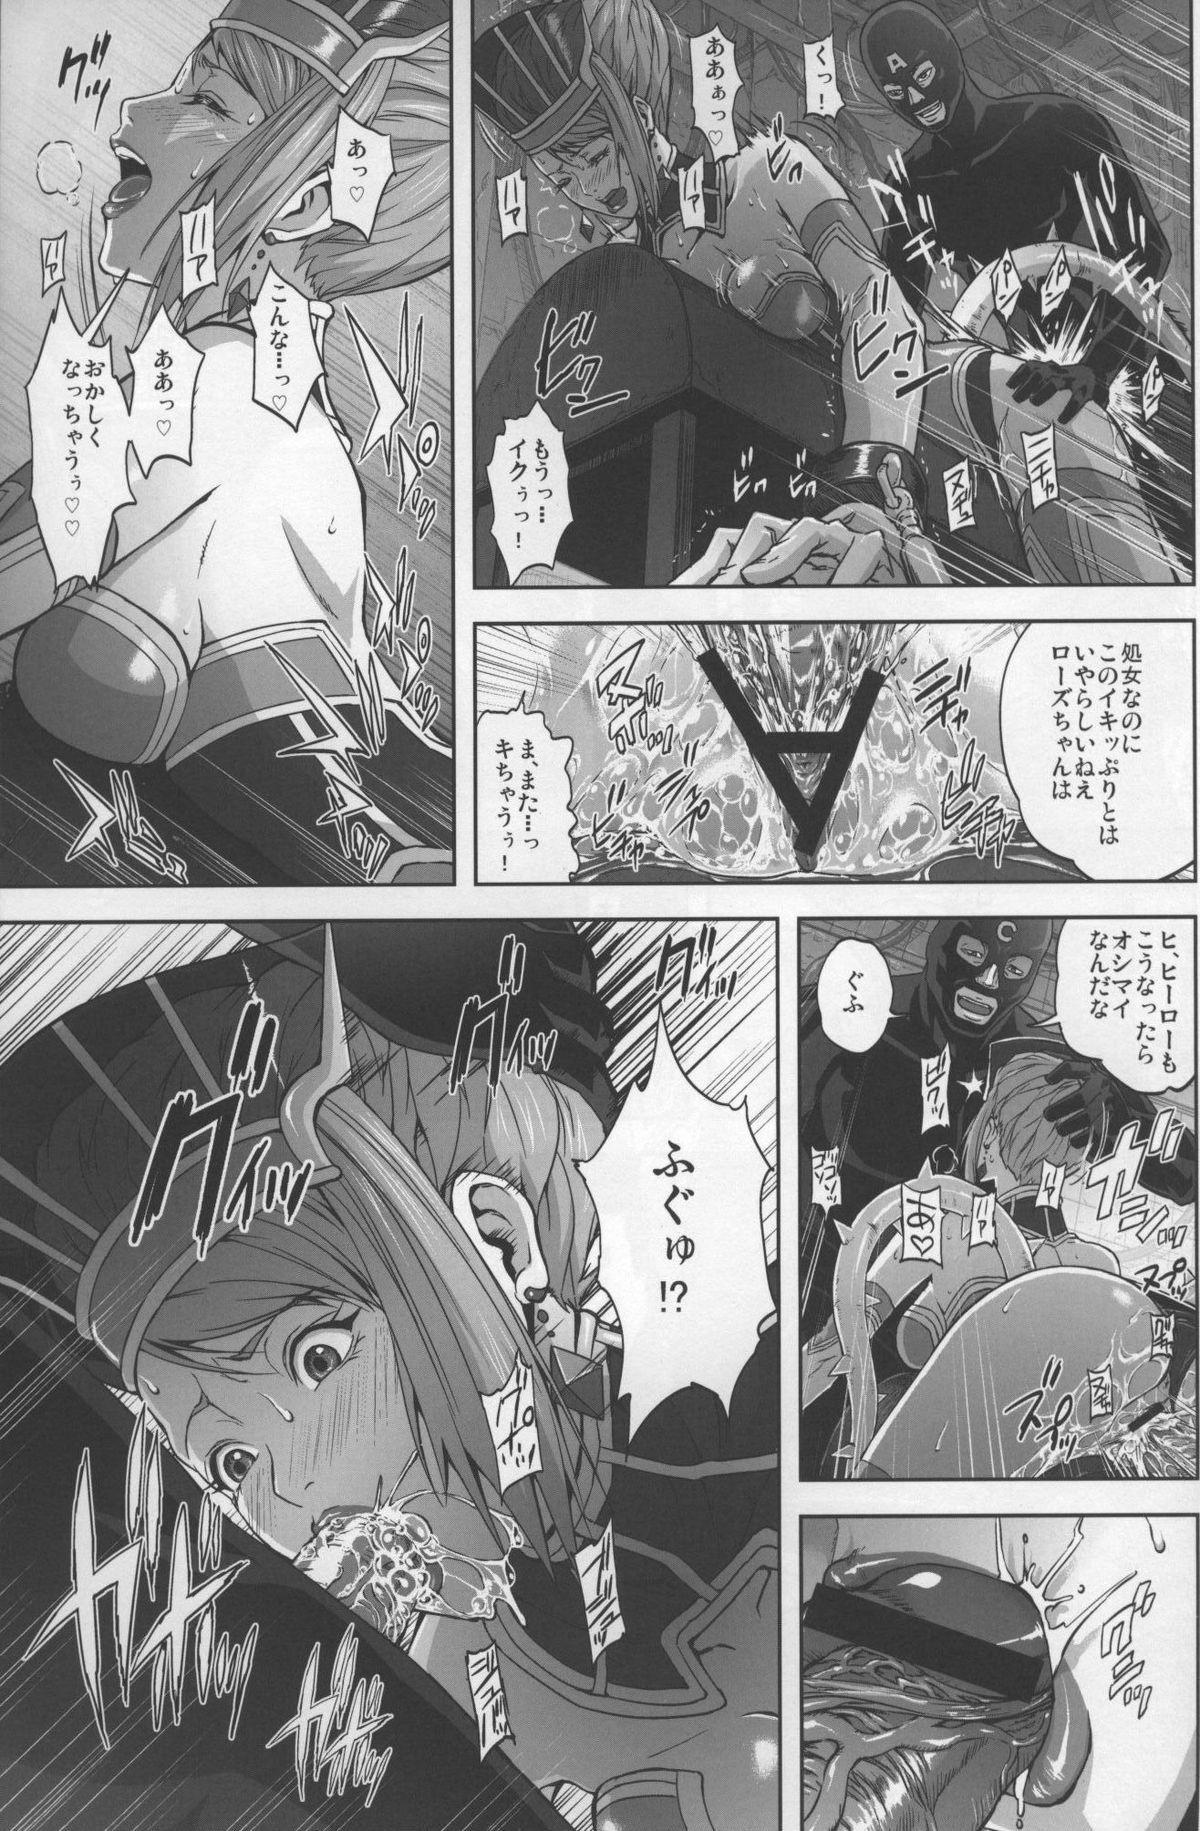 Nut DRAGON & ROSE - Tiger and bunny Coeds - Page 12